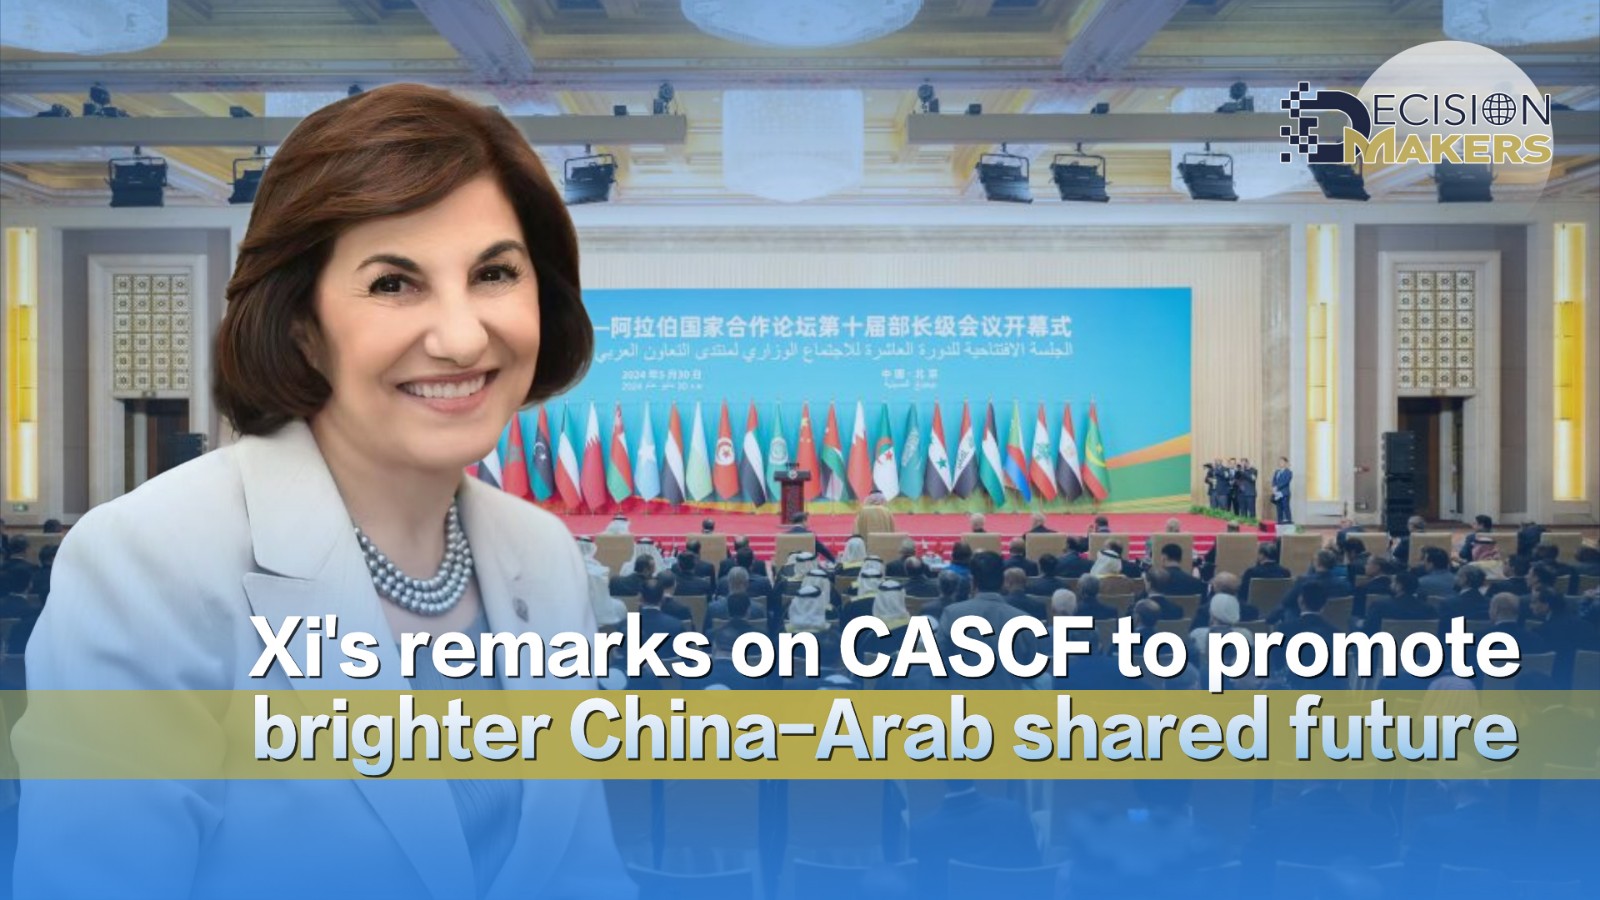 Xi's remarks on CASCF to promote brighter China-Arab shared future